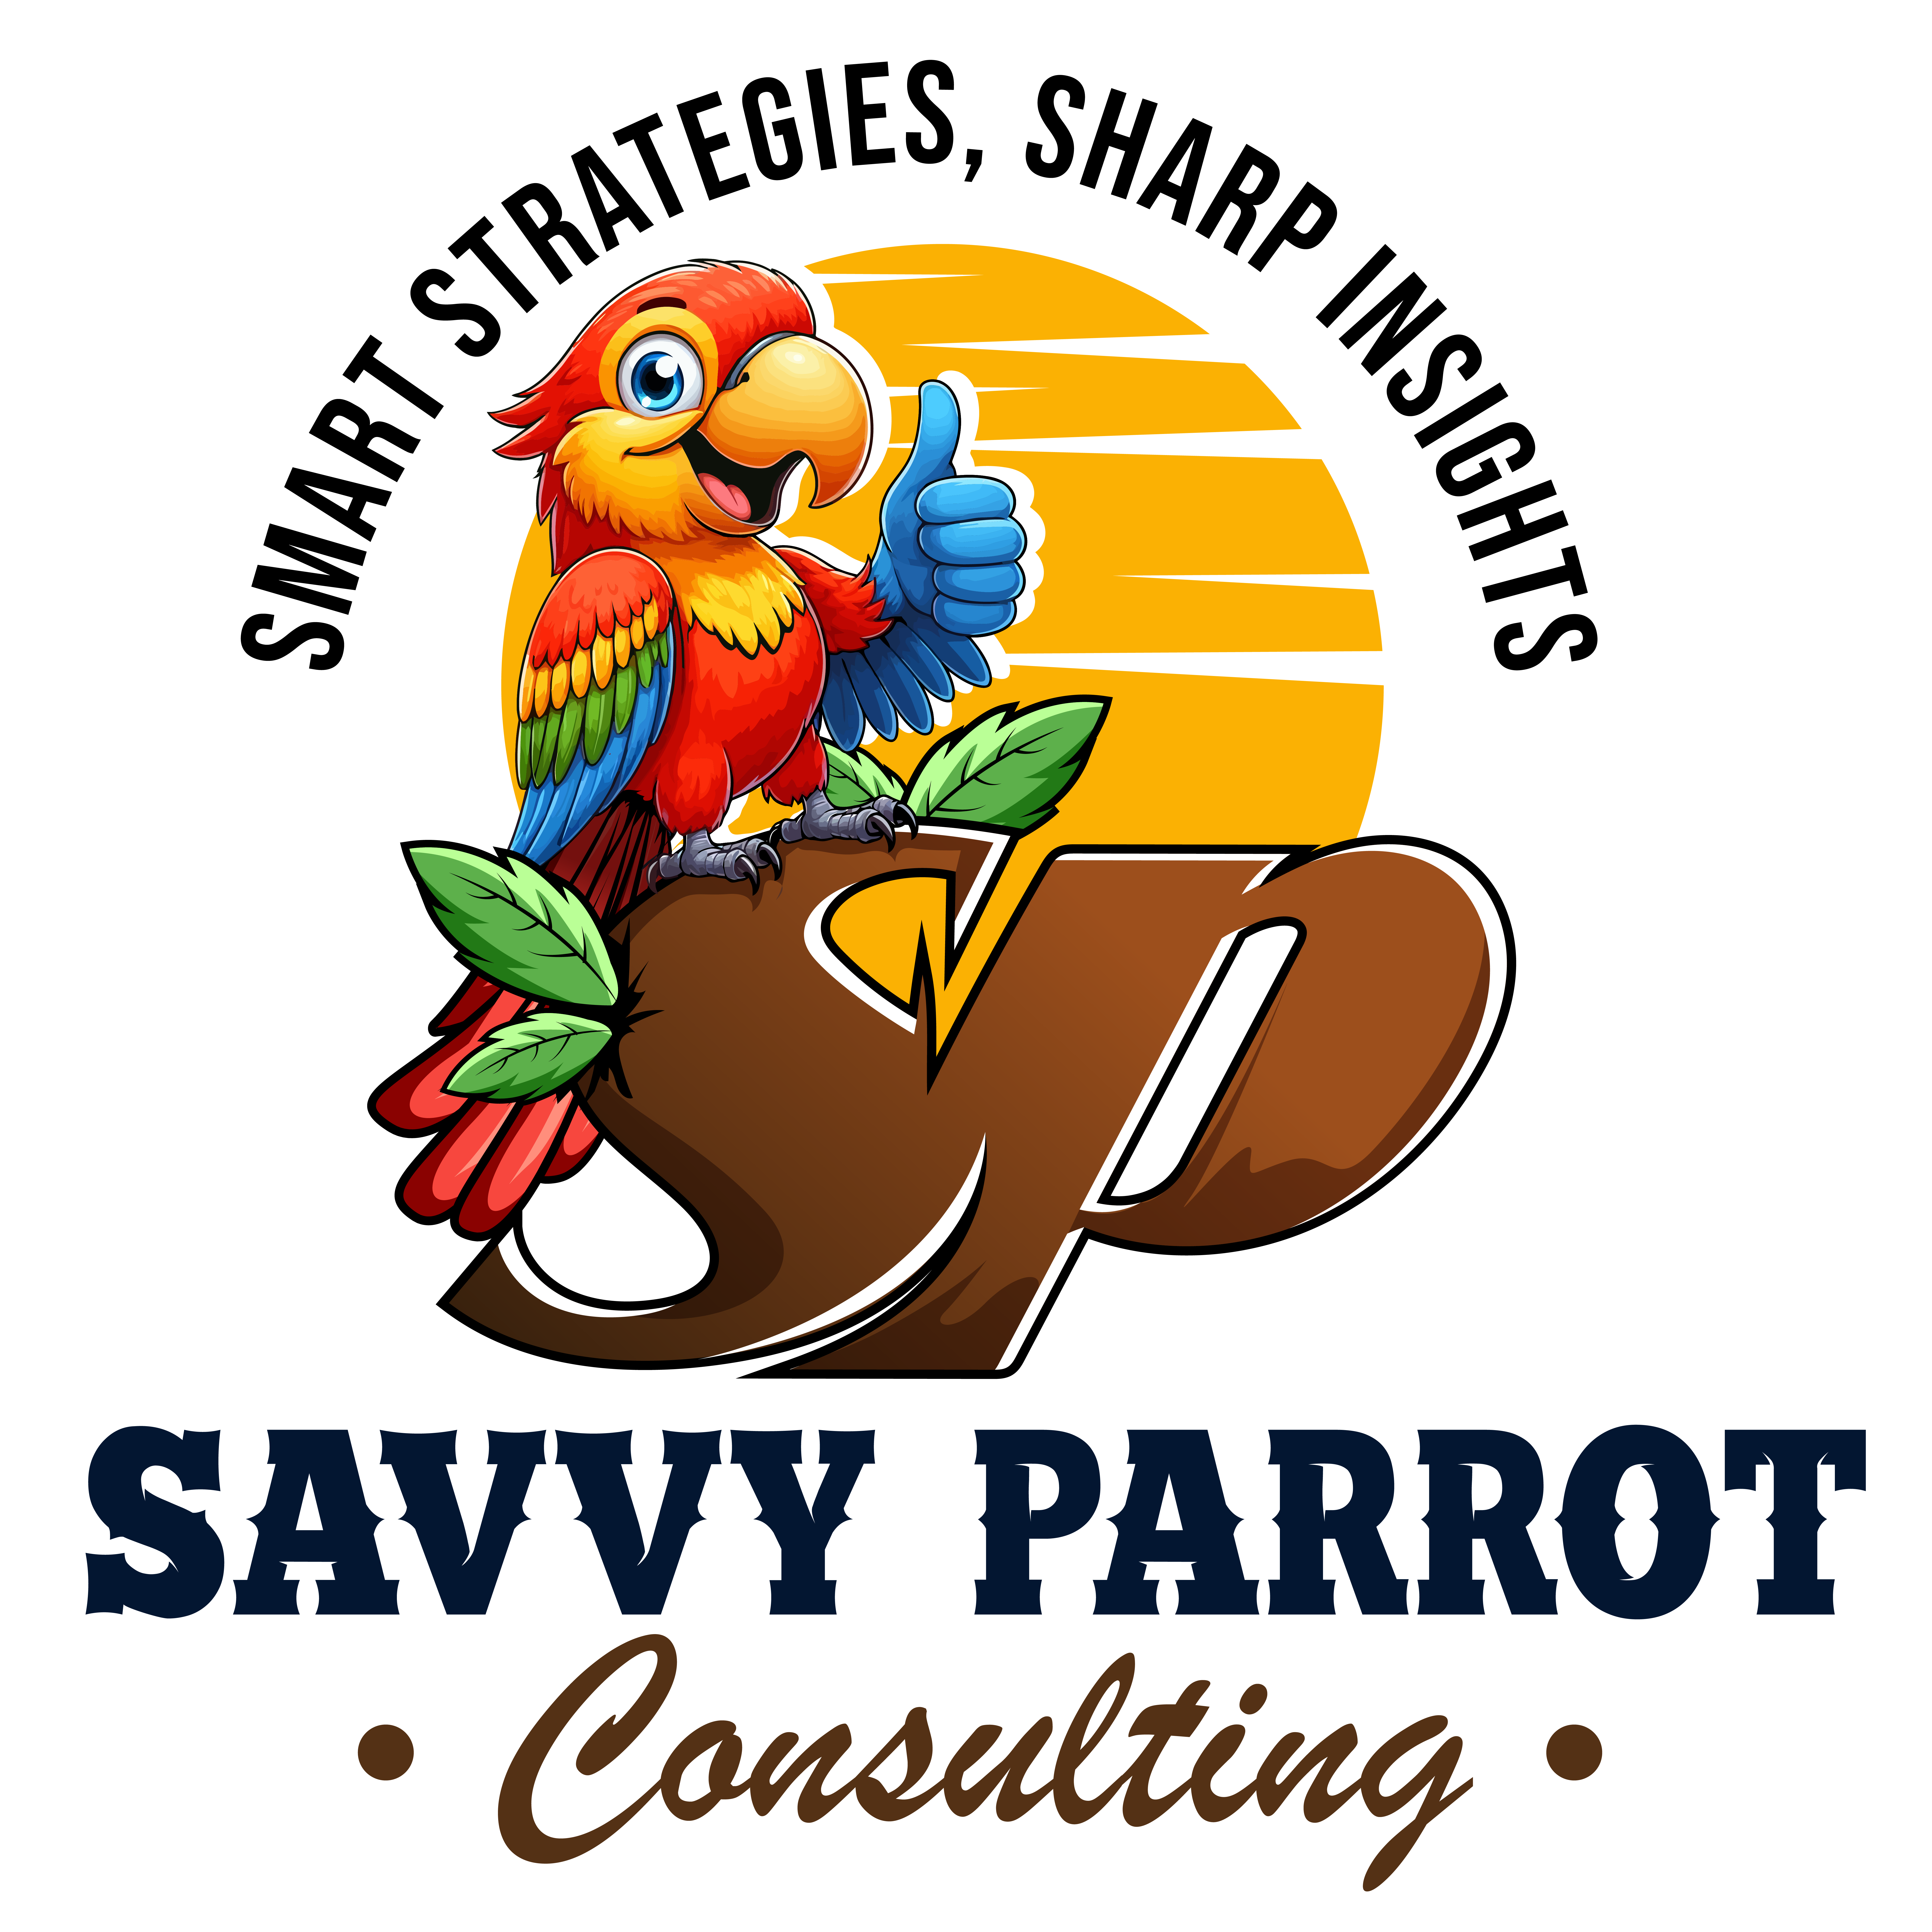 Savvy Parrot Consulting